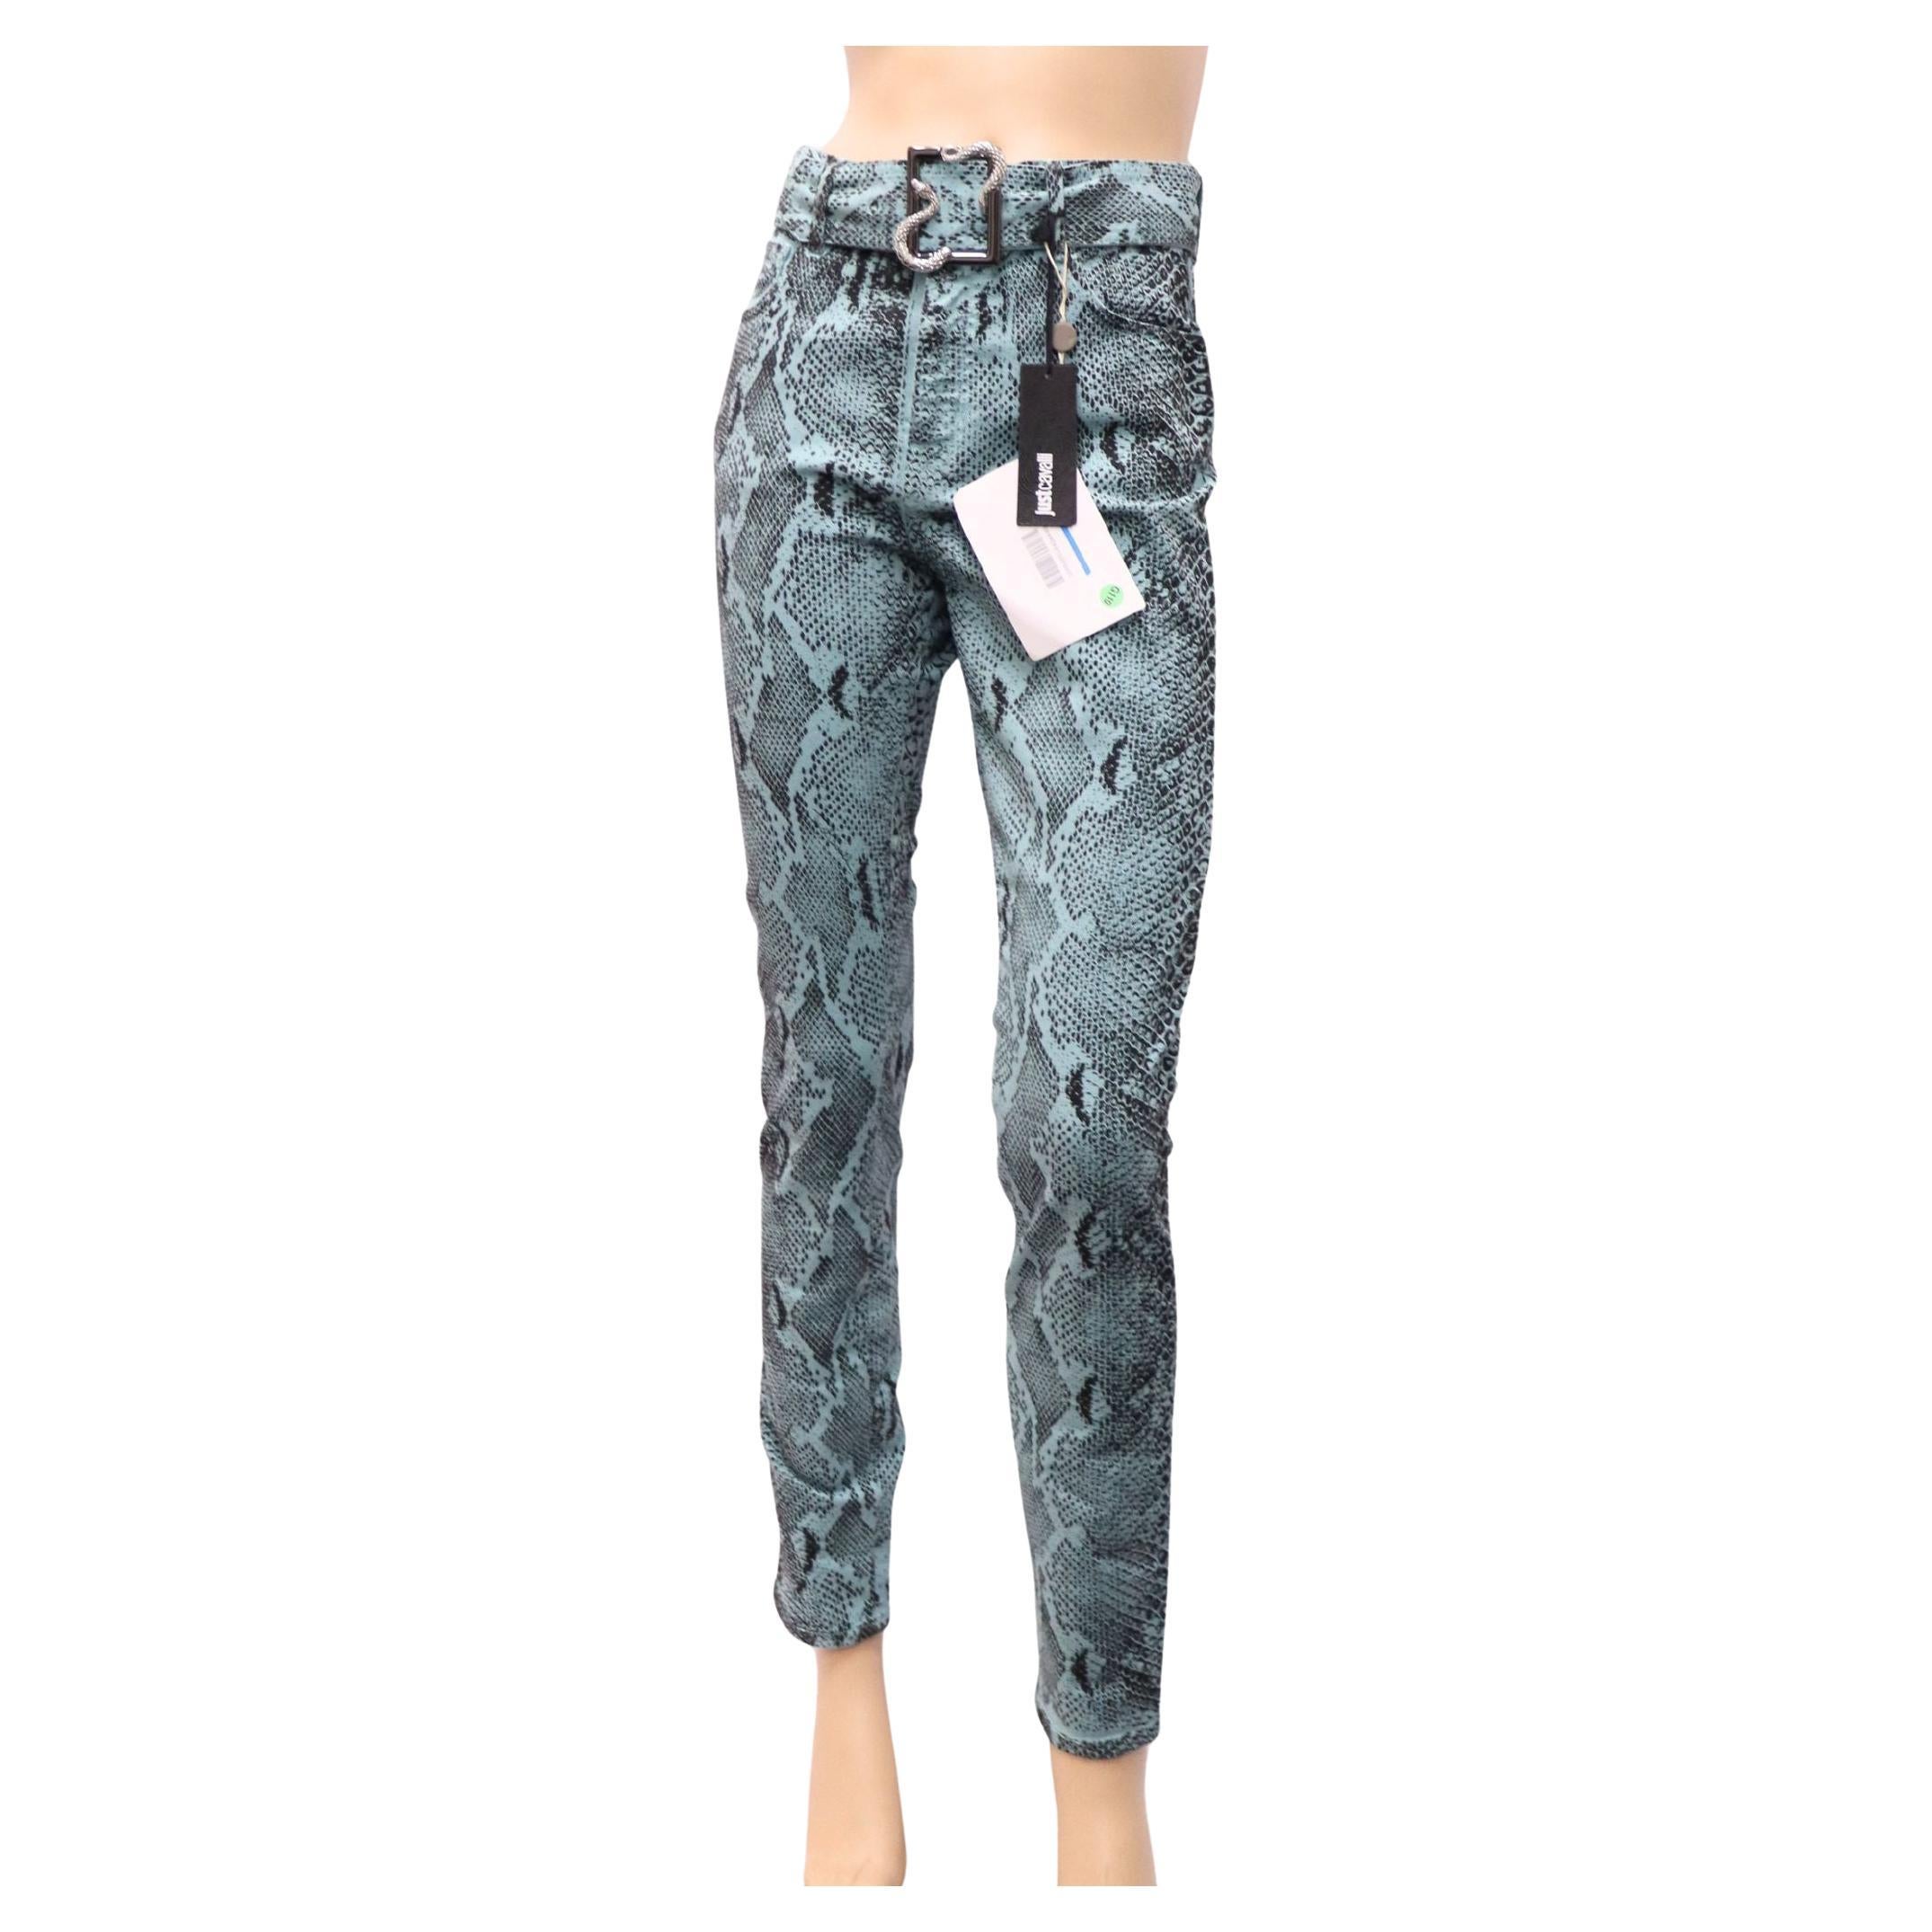 Just Cavalli NWT Snake Print Jeans - EU 26 For Sale